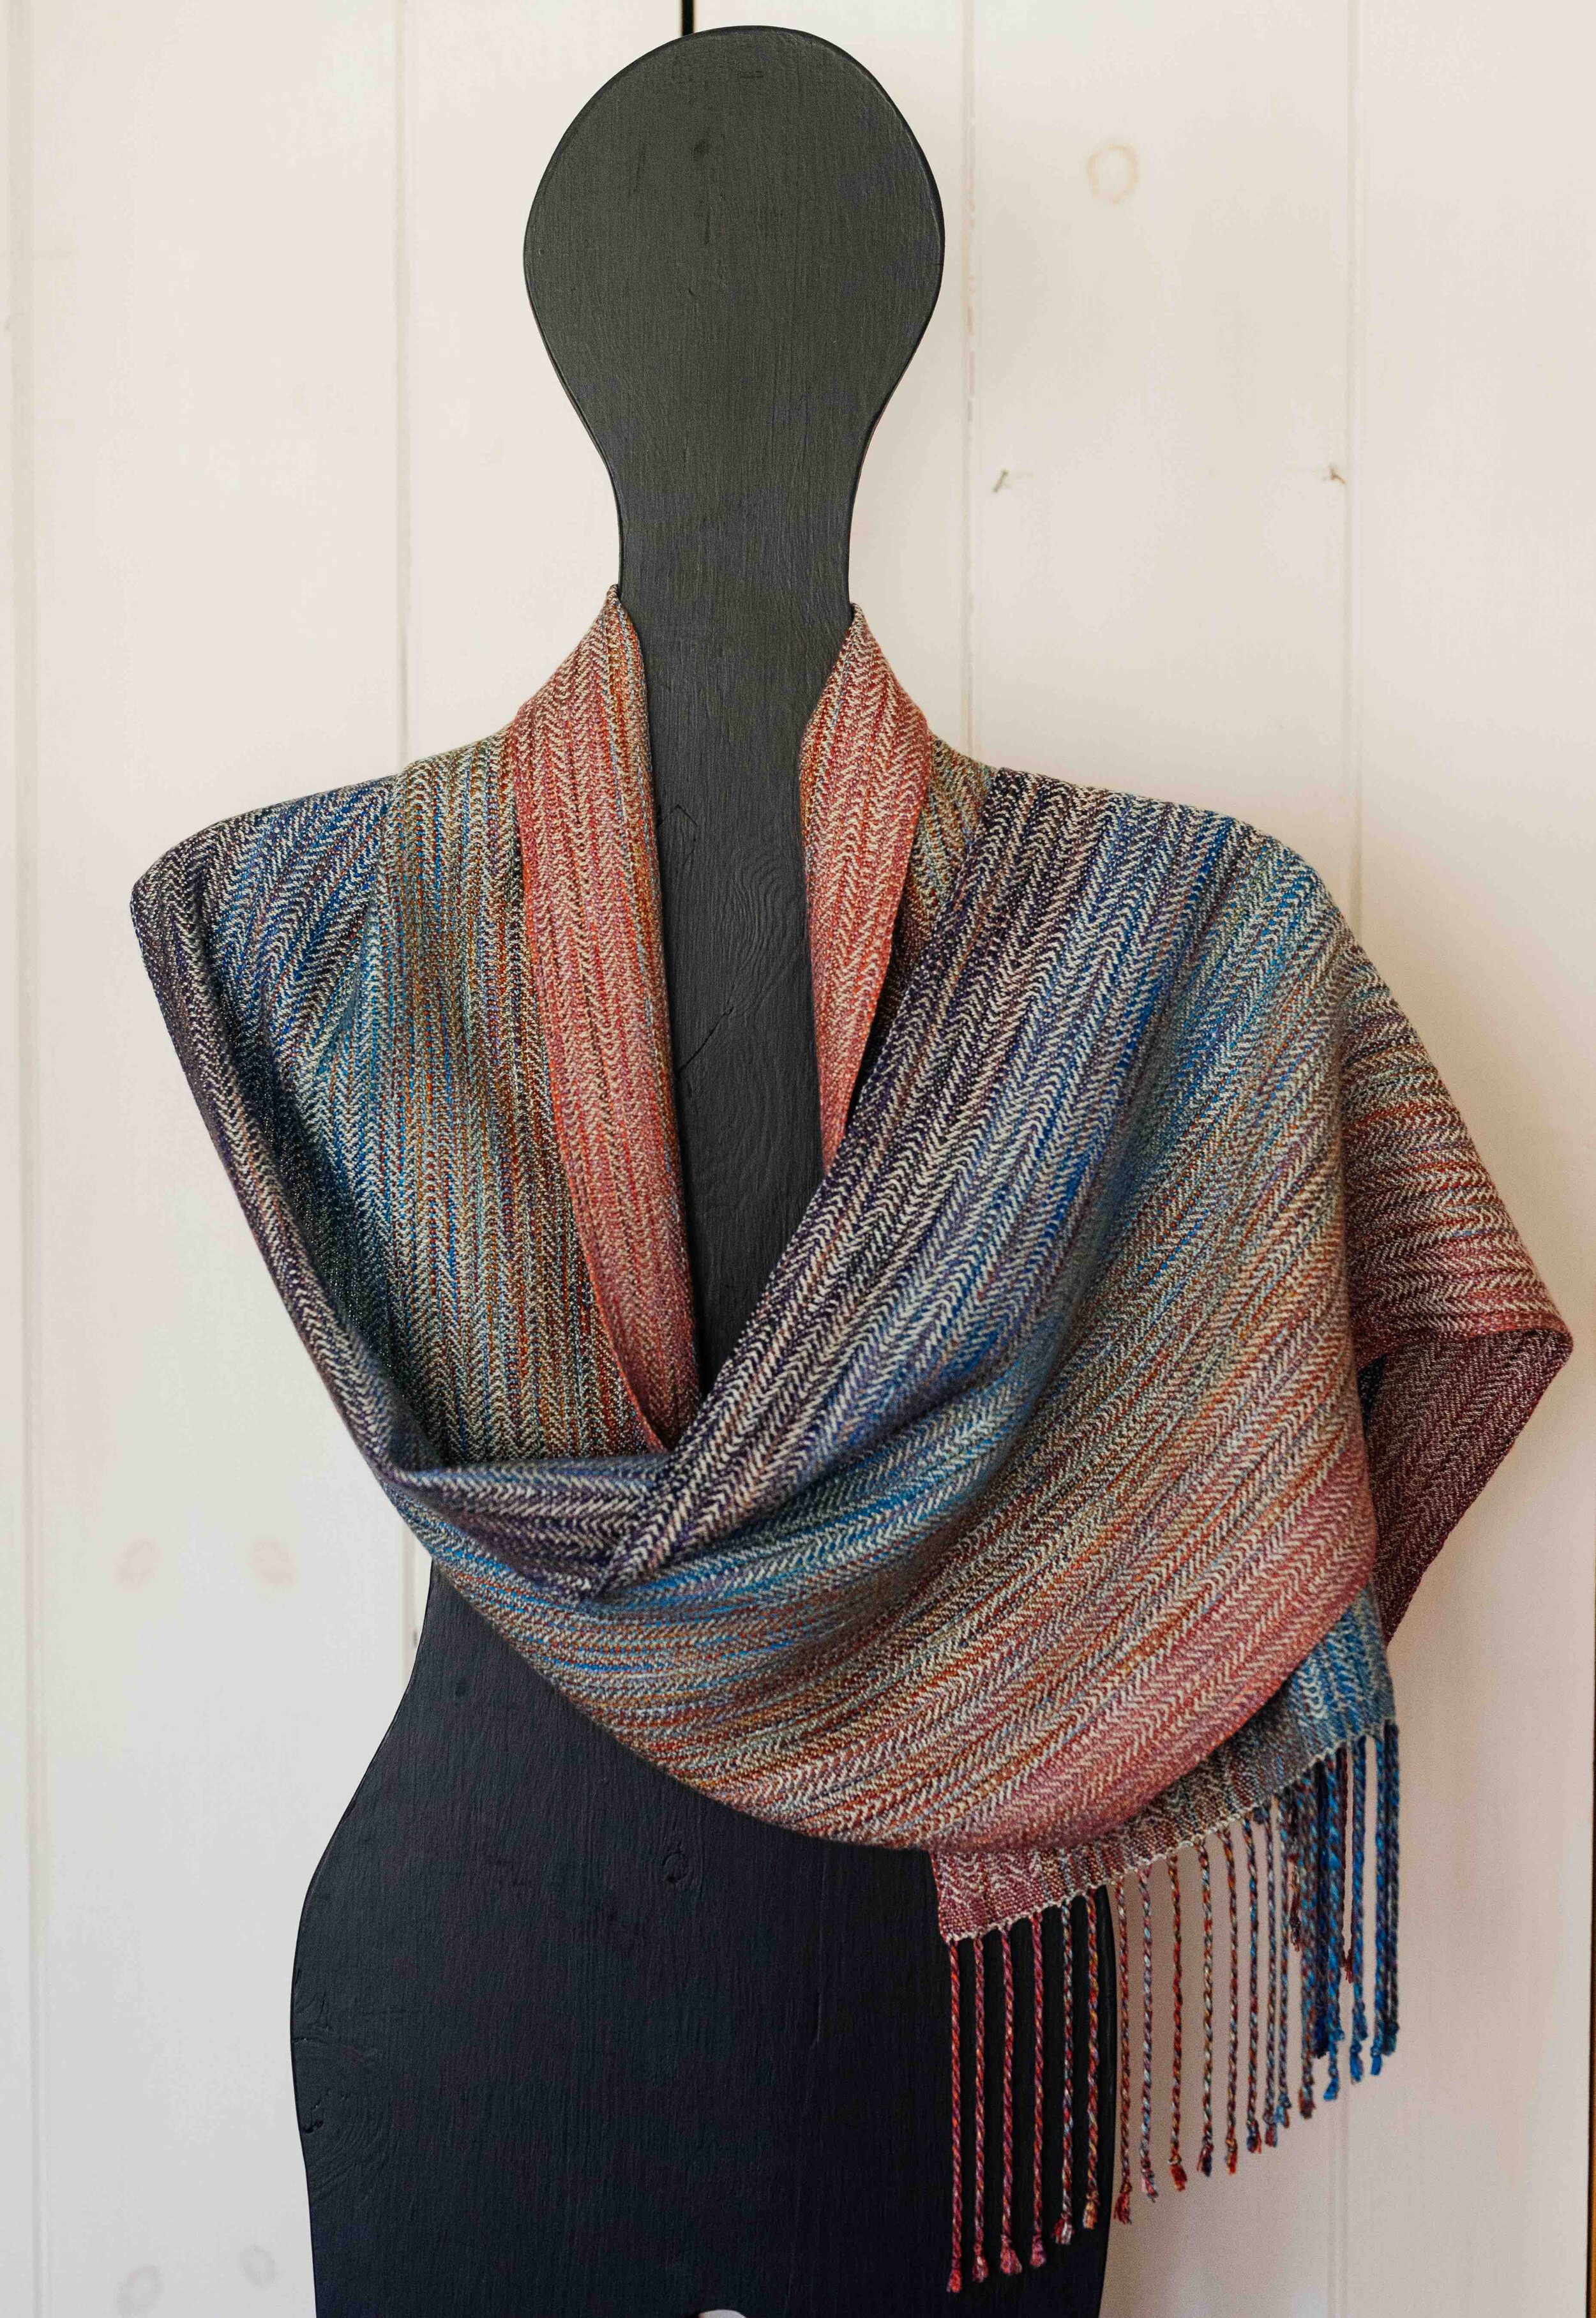 A scarf by Amy Smith of Blue Feet Studio. Photo by Lauryn Hottinger.